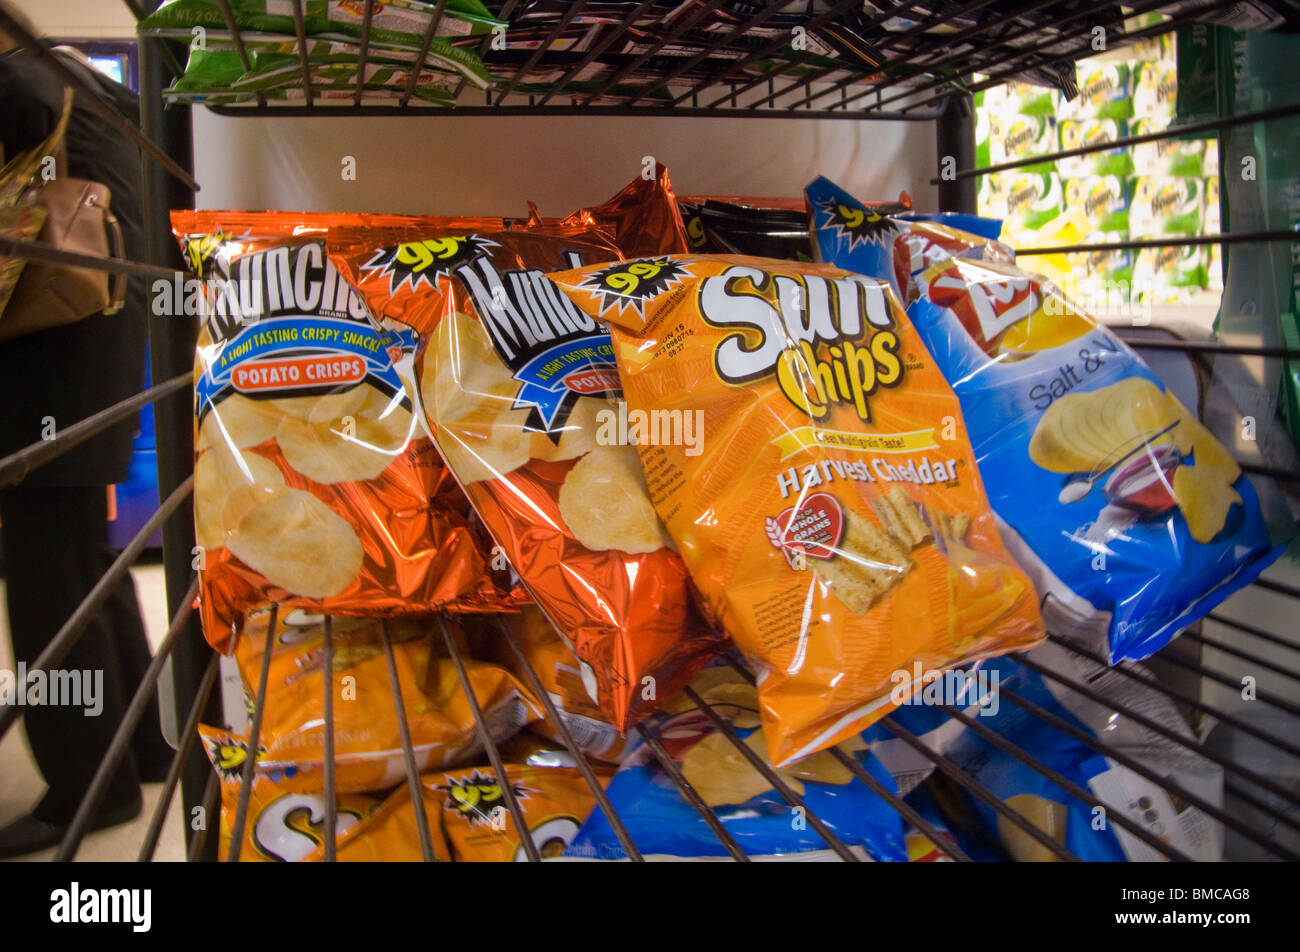 A display of tasty chips and other snacks in a supermarket in New York seen on Saturday, May 8, 2010. (© Richard B. Levine) Stock Photo